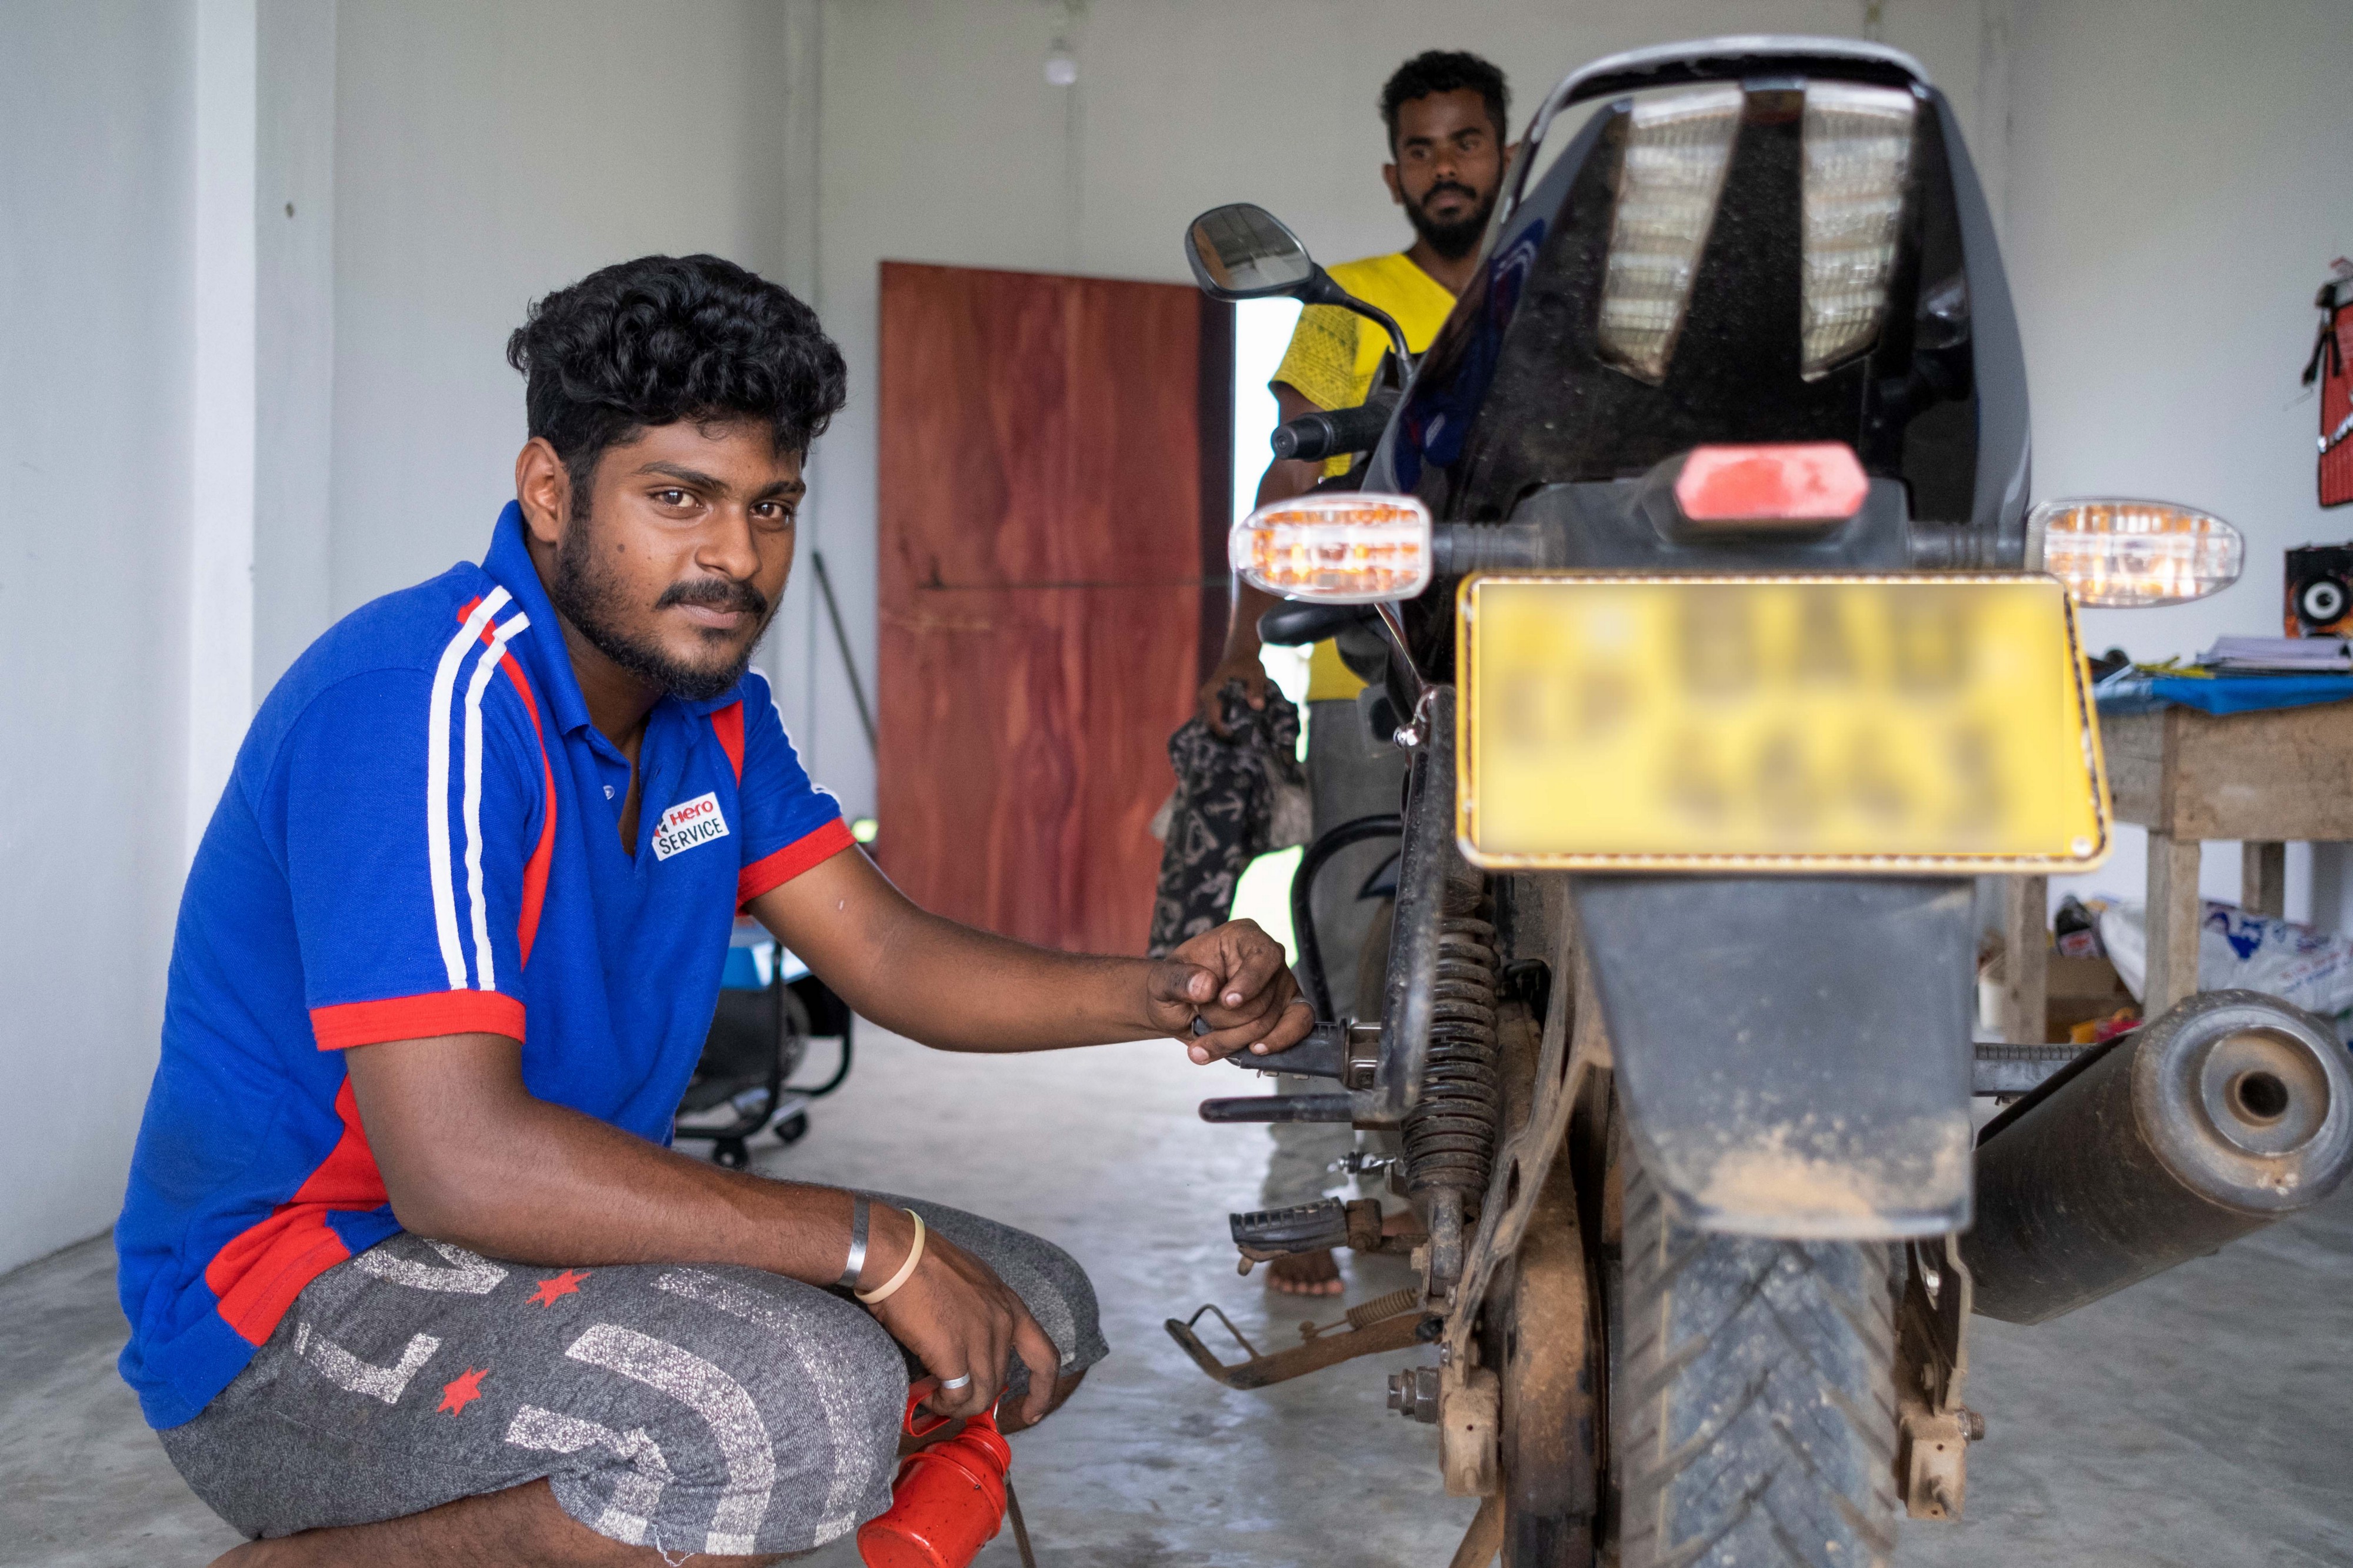 New business skills for Sri Lankans recovering from conflict